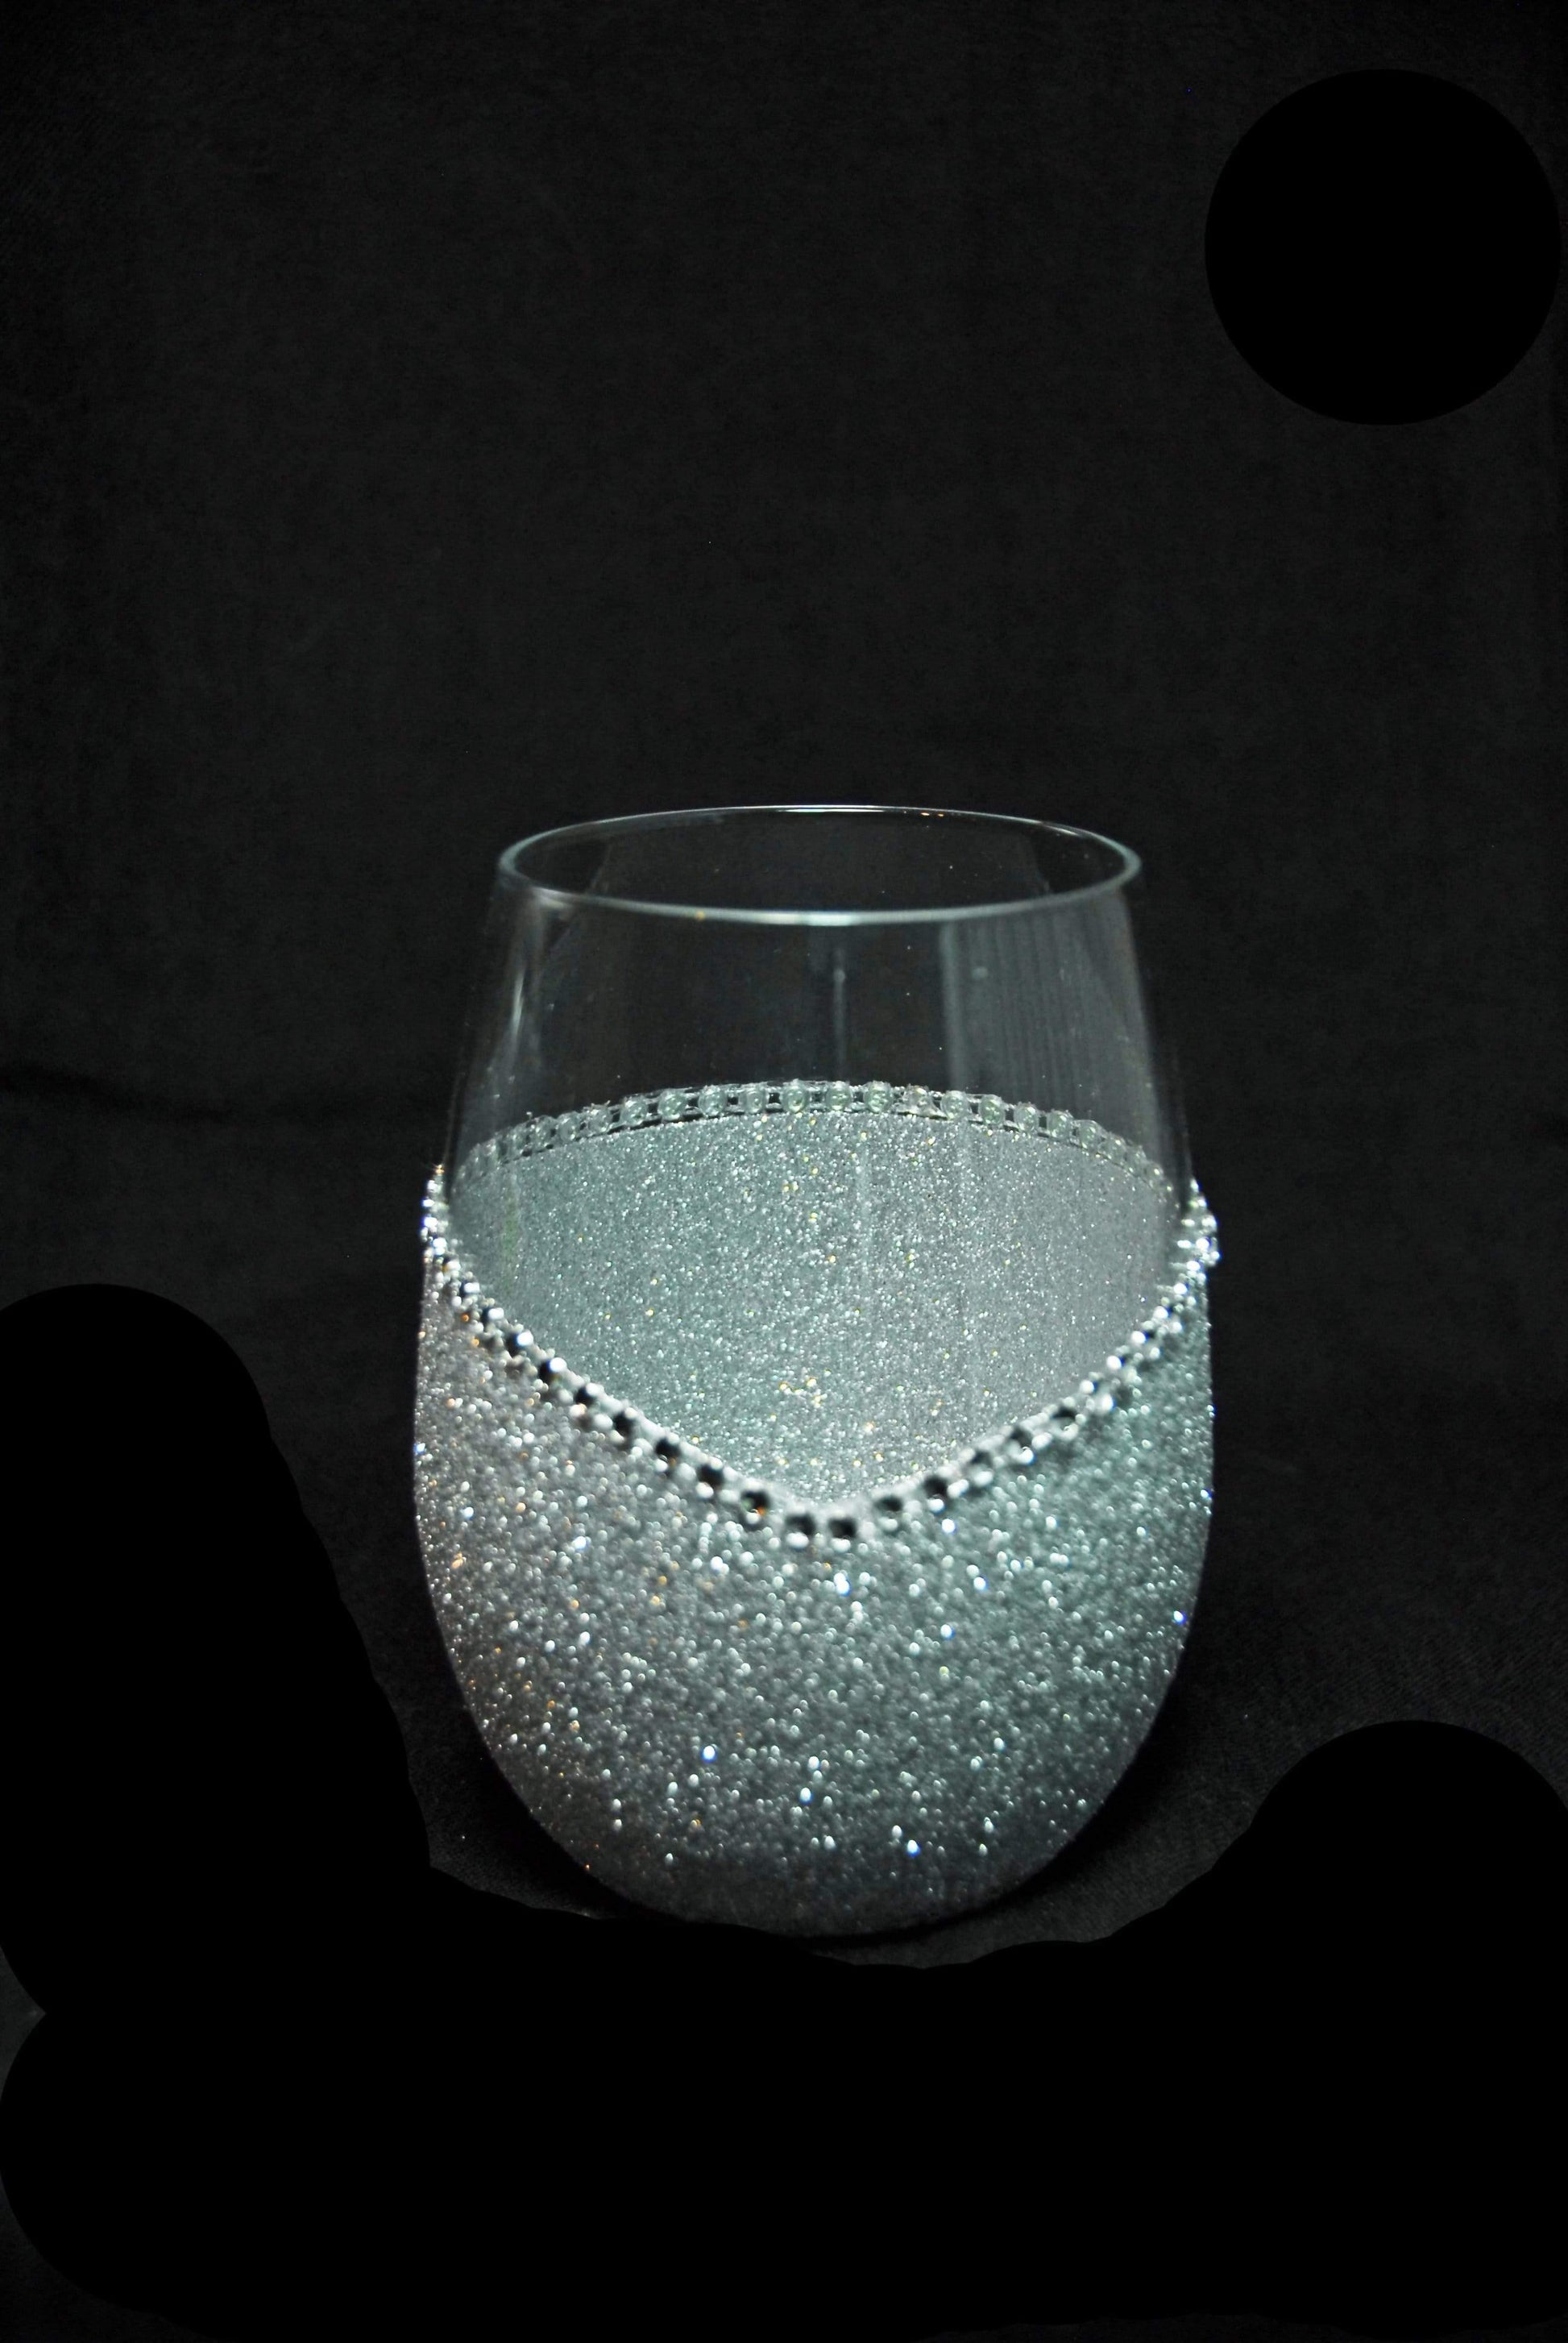 Floral Skull Design #5-Bling Stem or Stemless Wine Glasses-Choose your color-Pirate Theme - Winey Bitches - Wine- Women- K9's